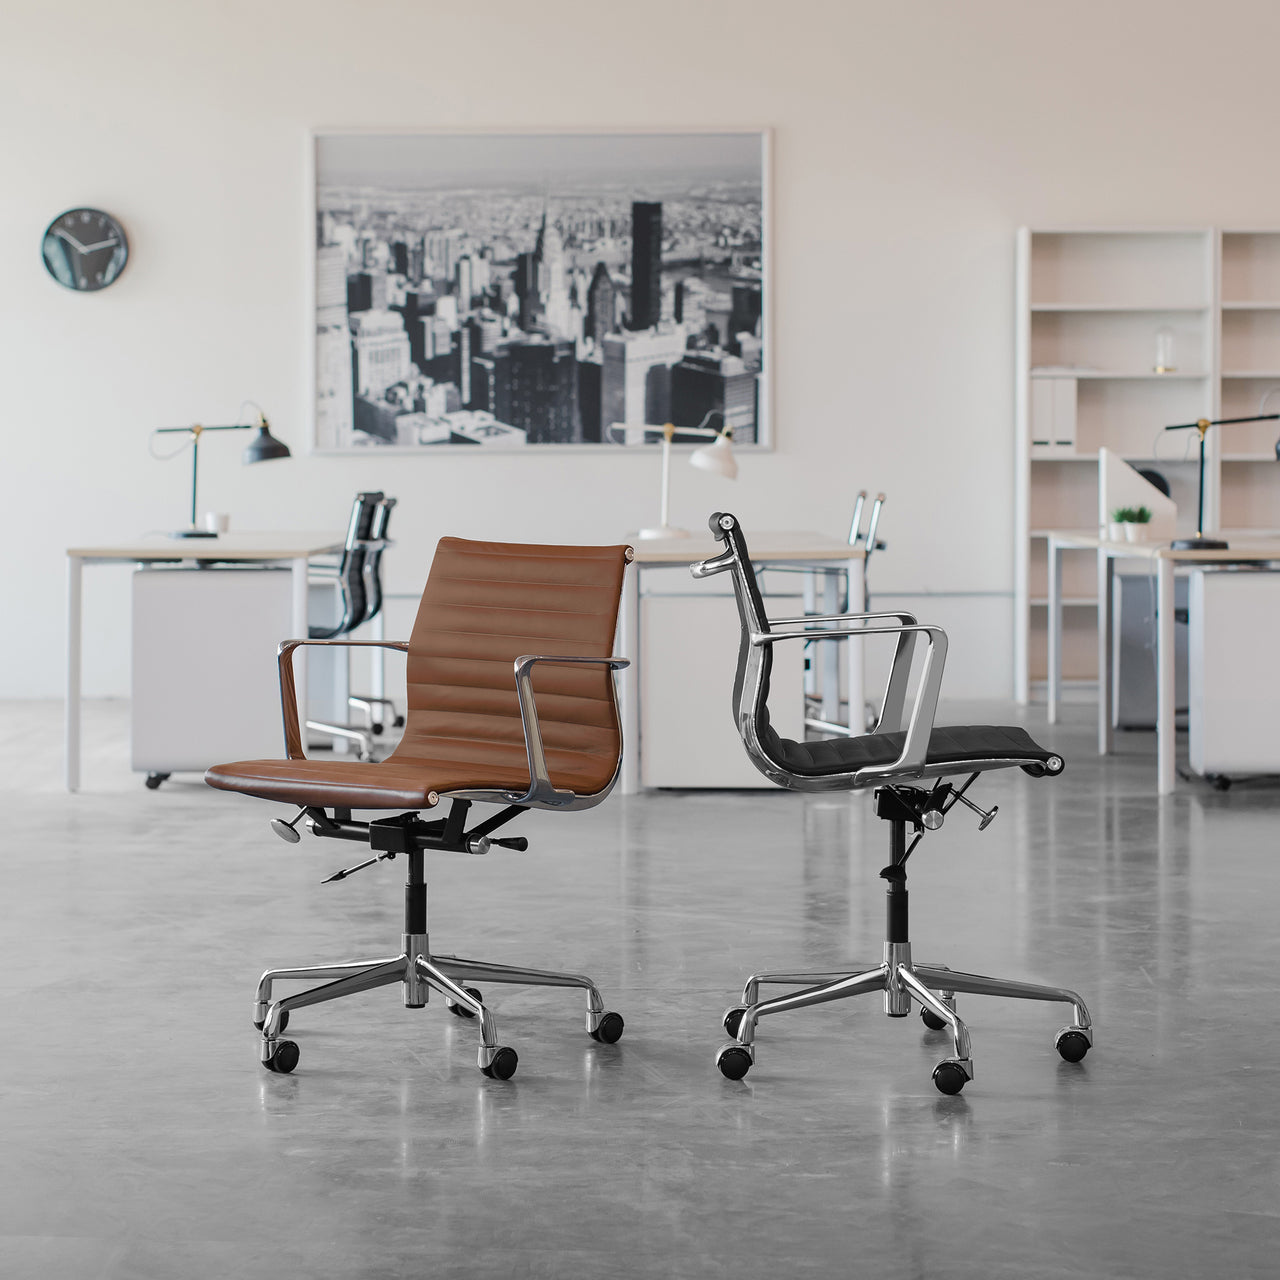 Pro Ribbed Management Chair (Brown Italian Leather)